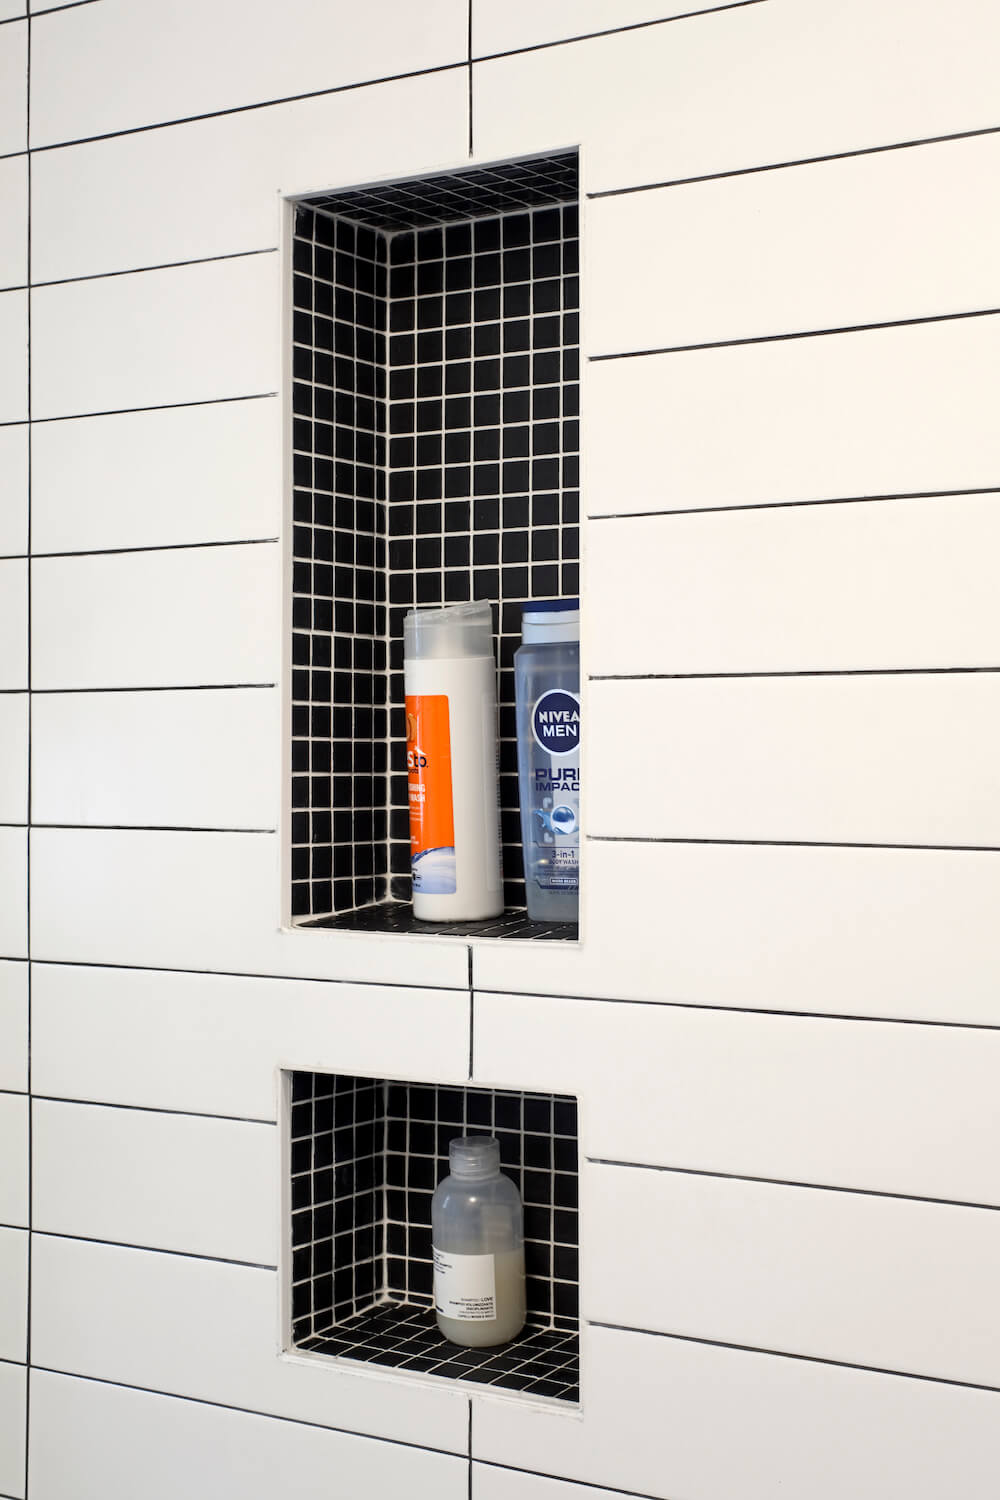 White bathroom tiles with gray grouting and recessed shower shelf with black mosiac tiles after renovation